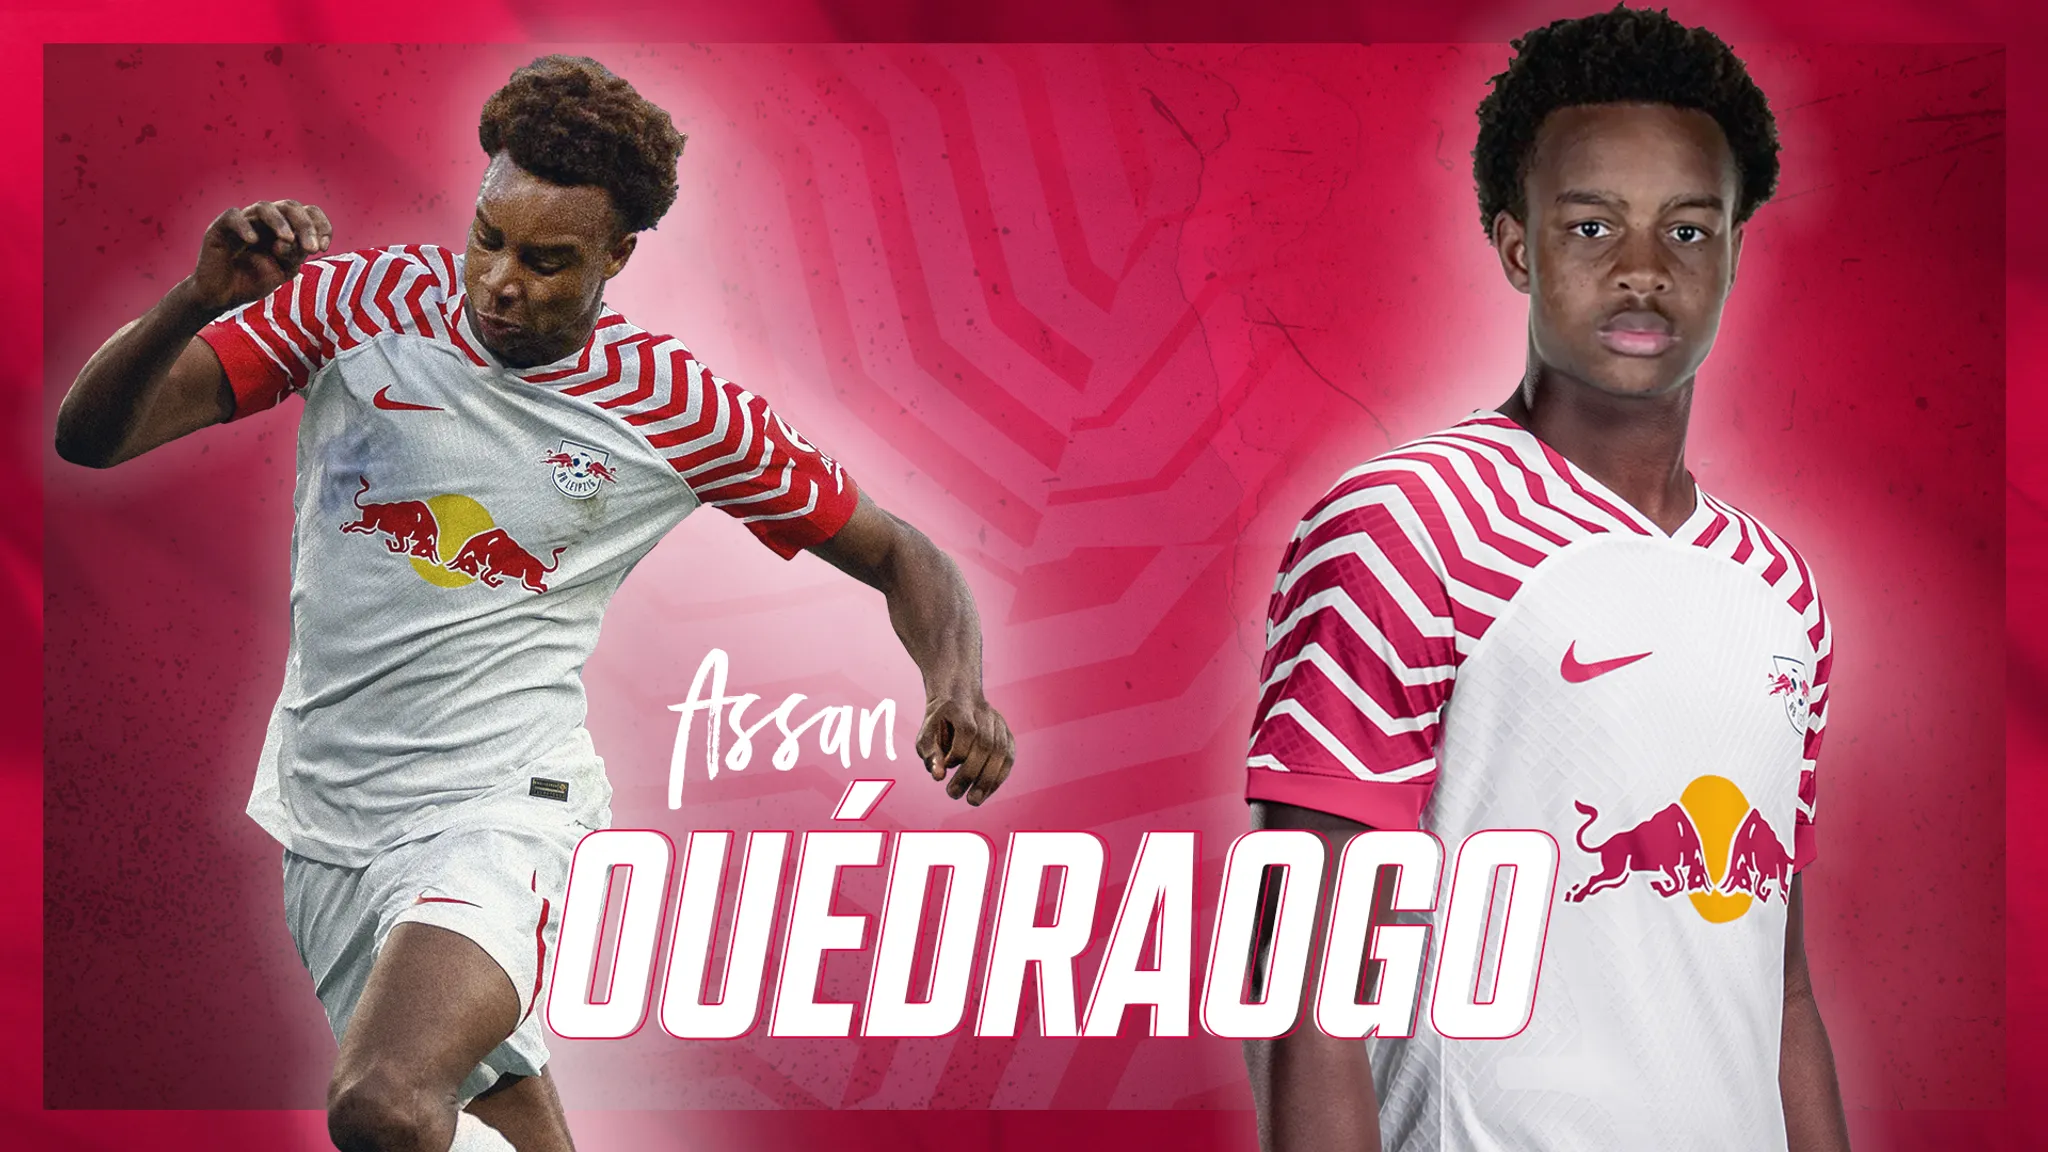 Exceptional talent Assan Ouedraogo moves to RB Leipzig!